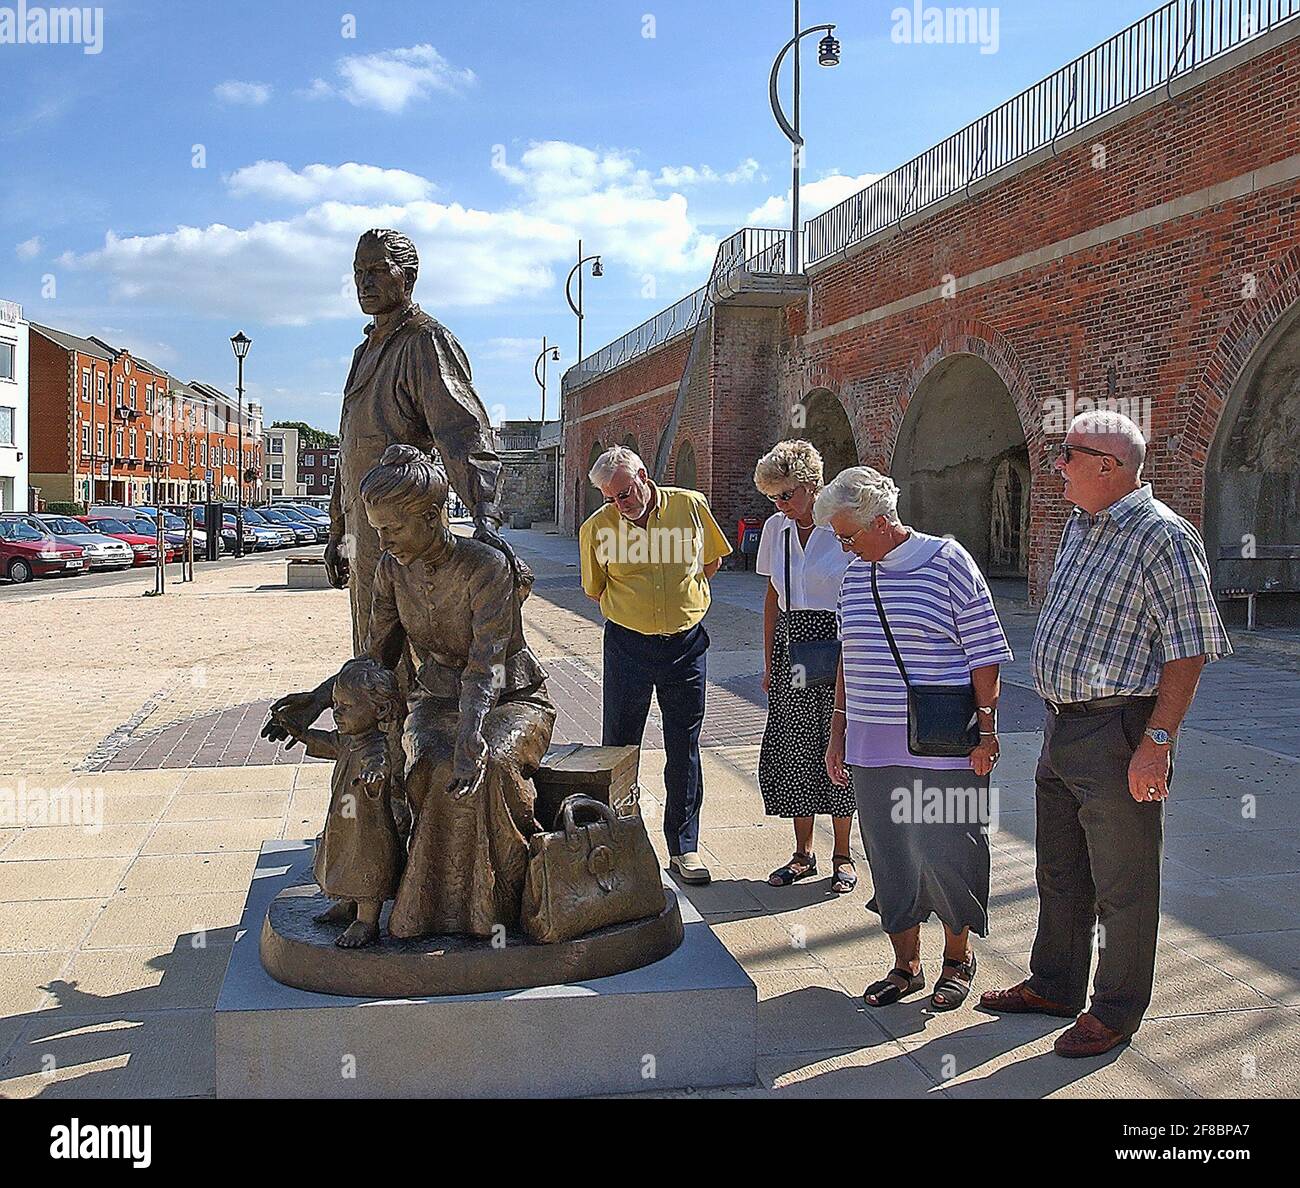 THE PIONEER STATUE, SALLYPORT, OLD PORTSMOUTH, HOT WALLS, BROAD STREET PIC MIKE WALKER, 2001 Stock Photo